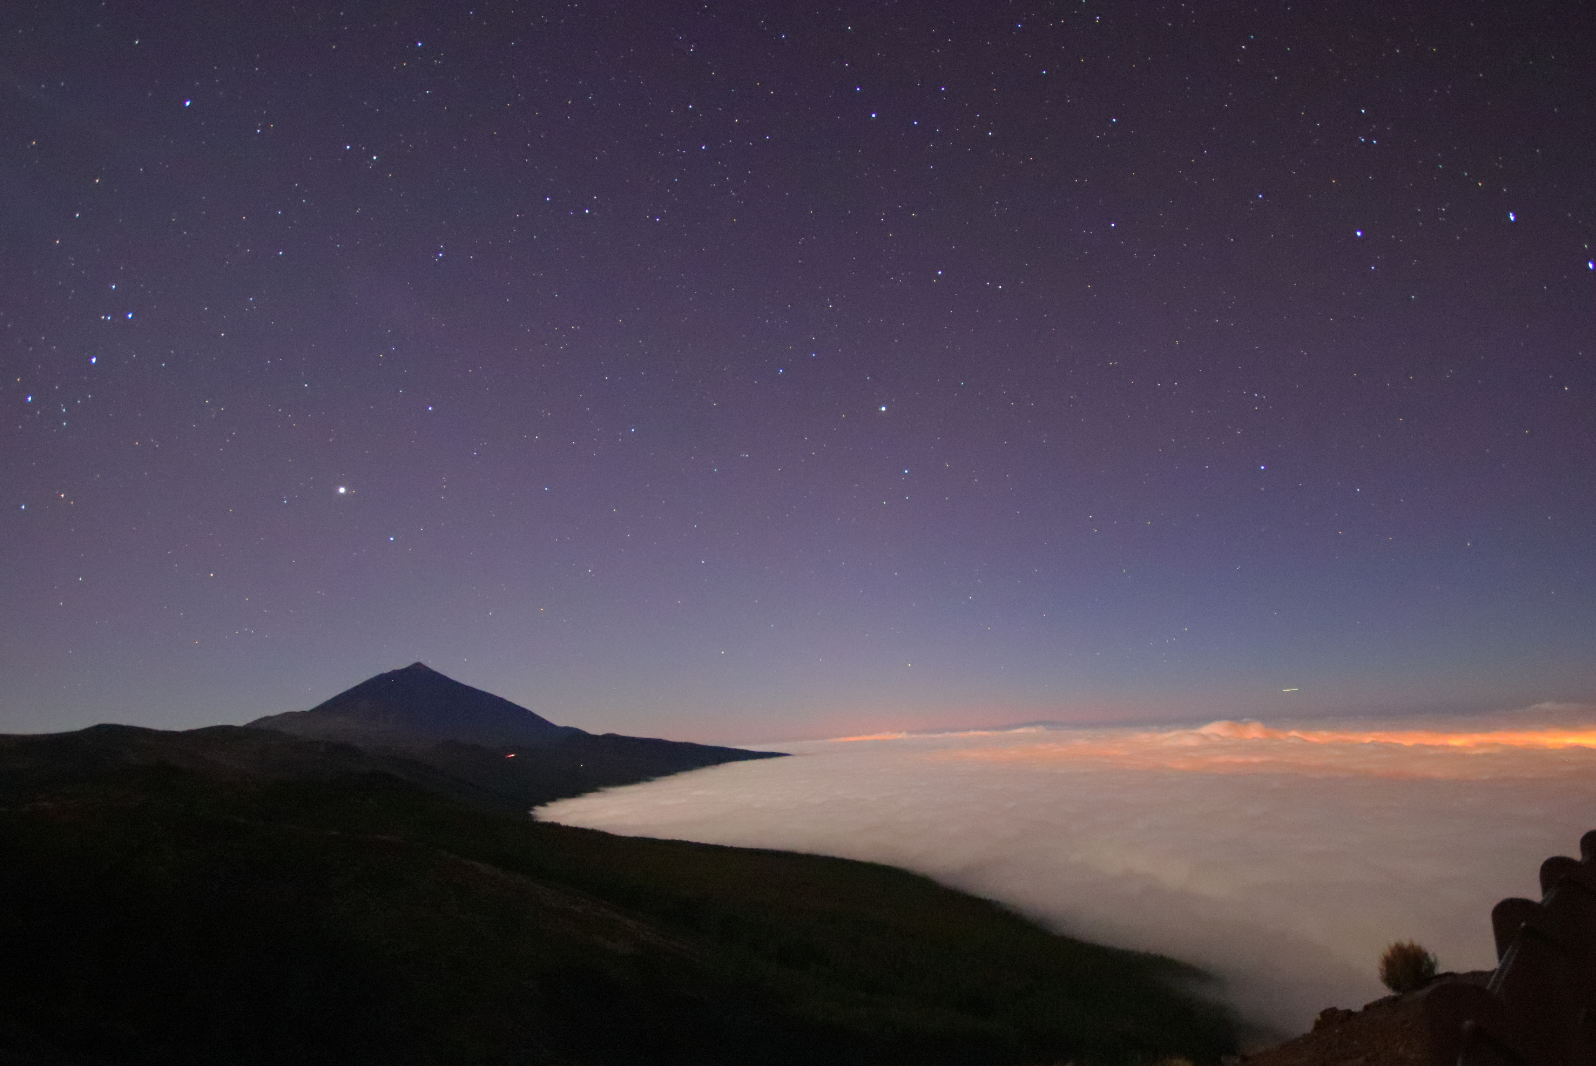 Sea of Clouds in Teide National Park